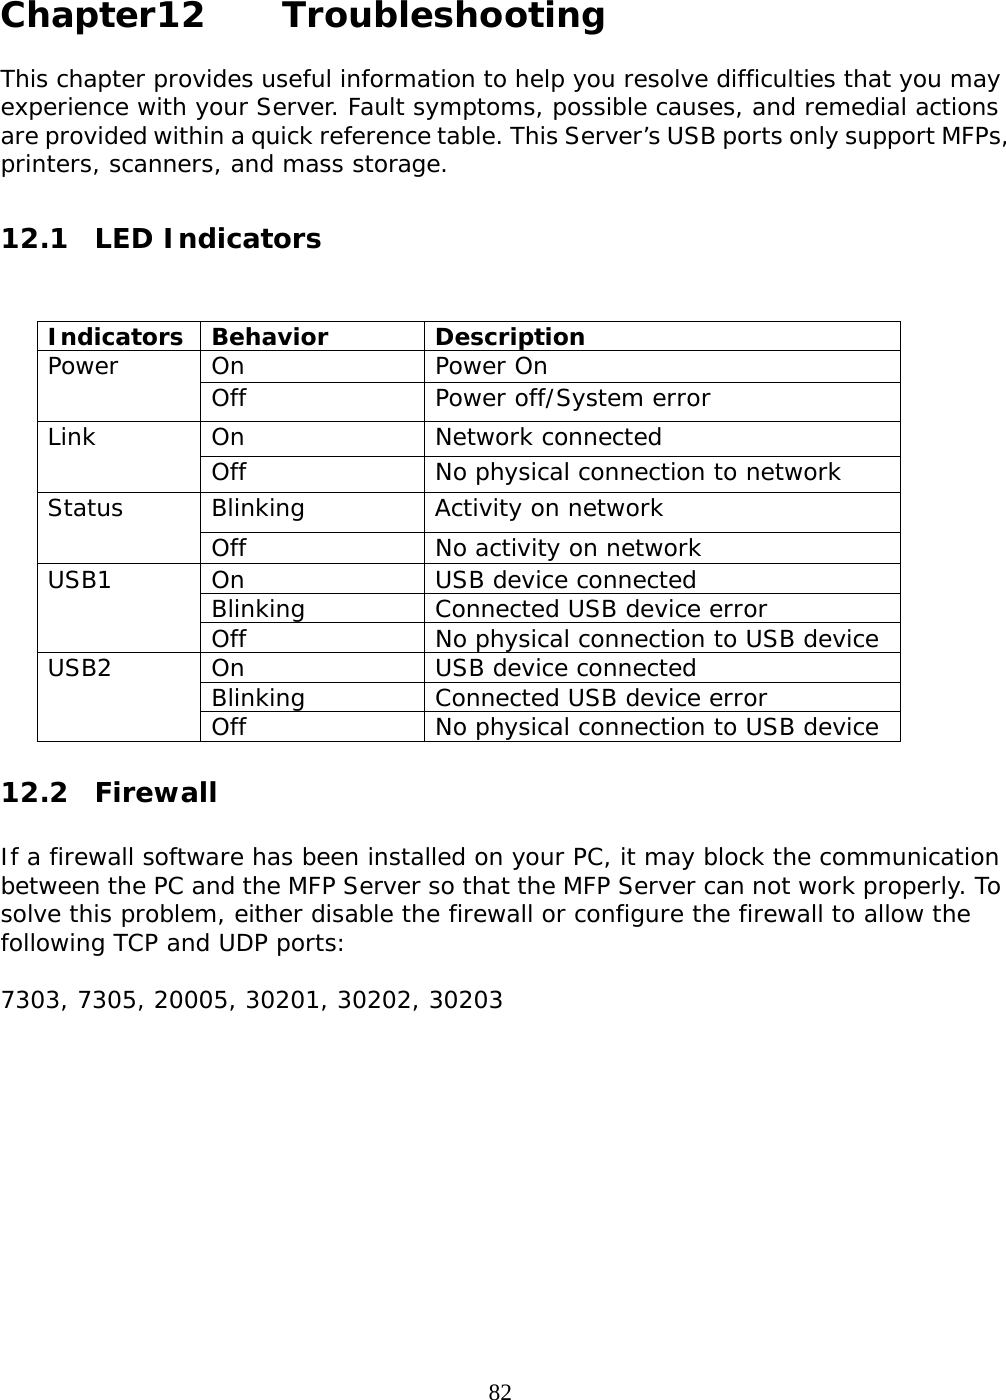     82 Chapter12   Troubleshooting  This chapter provides useful information to help you resolve difficulties that you may experience with your Server. Fault symptoms, possible causes, and remedial actions are provided within a quick reference table. This Server’s USB ports only support MFPs, printers, scanners, and mass storage.   12.1 LED Indicators   Indicators Behavior  Description On Power On Power  Off Power off/System error On Network connected Link  Off  No physical connection to network Blinking Activity on network Status  Off  No activity on network On  USB device connected Blinking  Connected USB device error  USB1 Off  No physical connection to USB device On  USB device connected Blinking  Connected USB device error  USB2 Off  No physical connection to USB device  12.2 Firewall  If a firewall software has been installed on your PC, it may block the communication between the PC and the MFP Server so that the MFP Server can not work properly. To solve this problem, either disable the firewall or configure the firewall to allow the following TCP and UDP ports:  7303, 7305, 20005, 30201, 30202, 30203